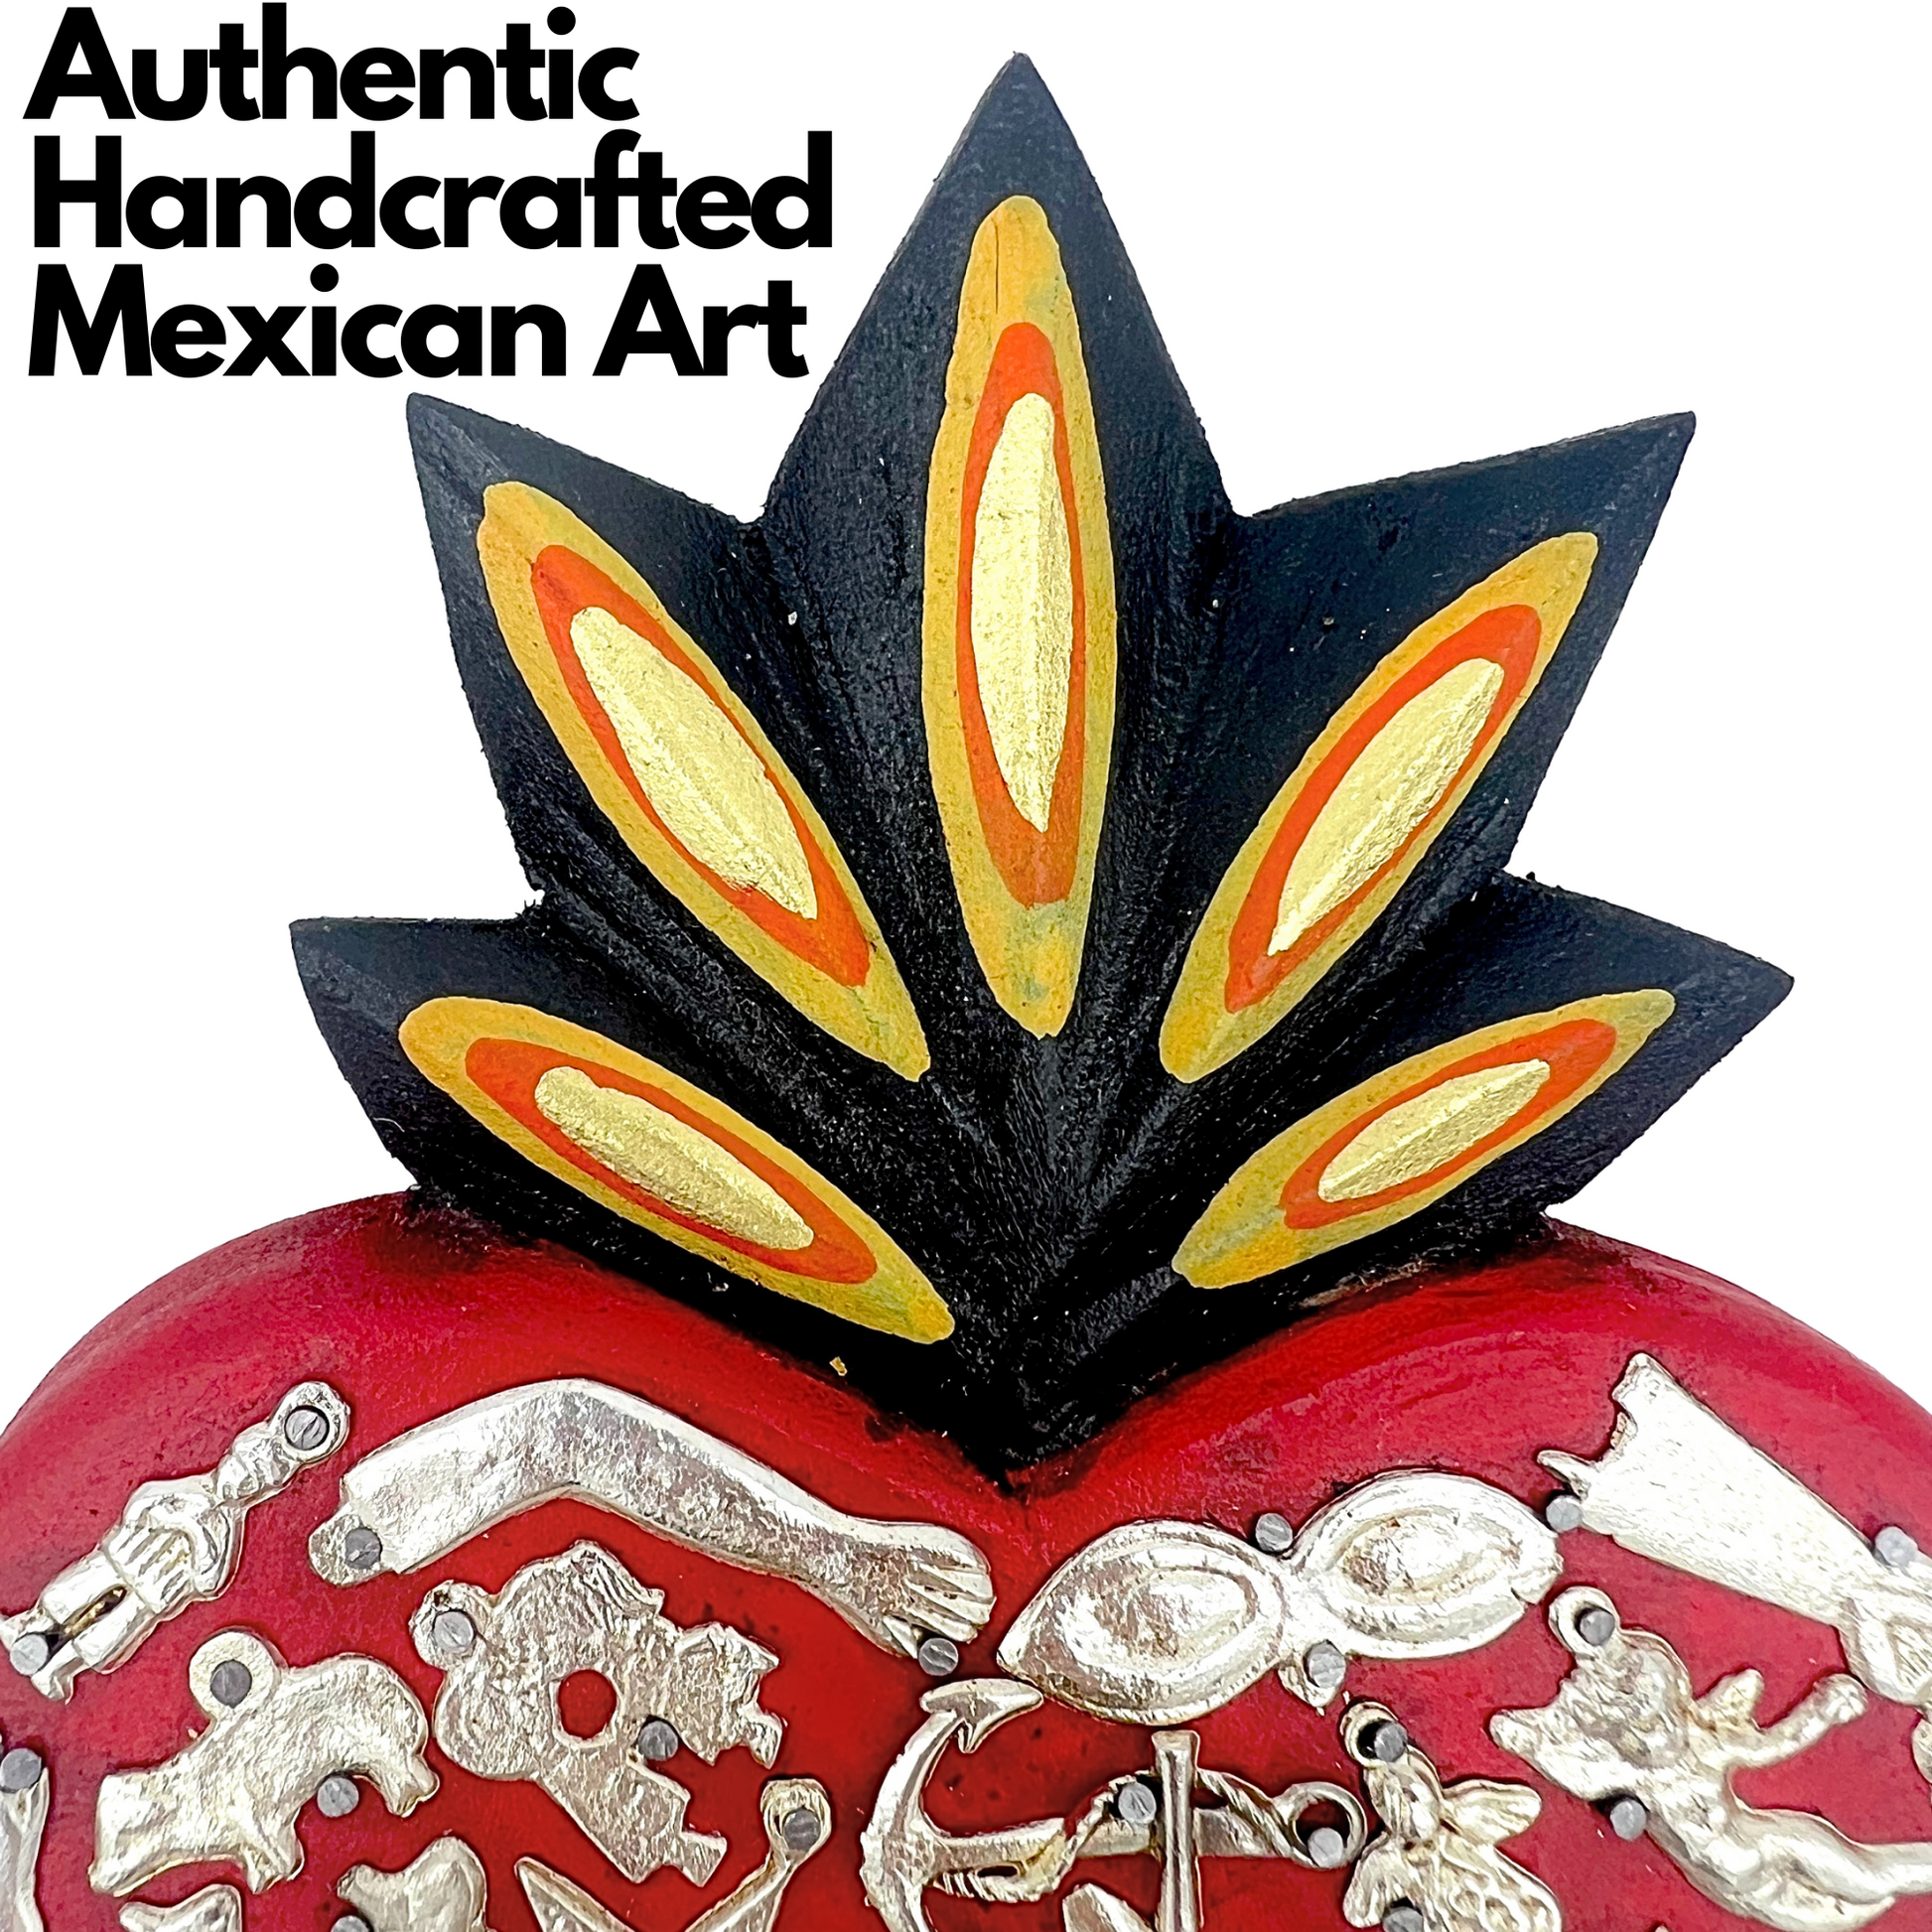 authentic handcrafted mexicn art Ex Voto Wooden Sacred Heart, hand-painted by Mexican artisans, featuring colorful milagros, perfect for wall decor and enhancing your space.